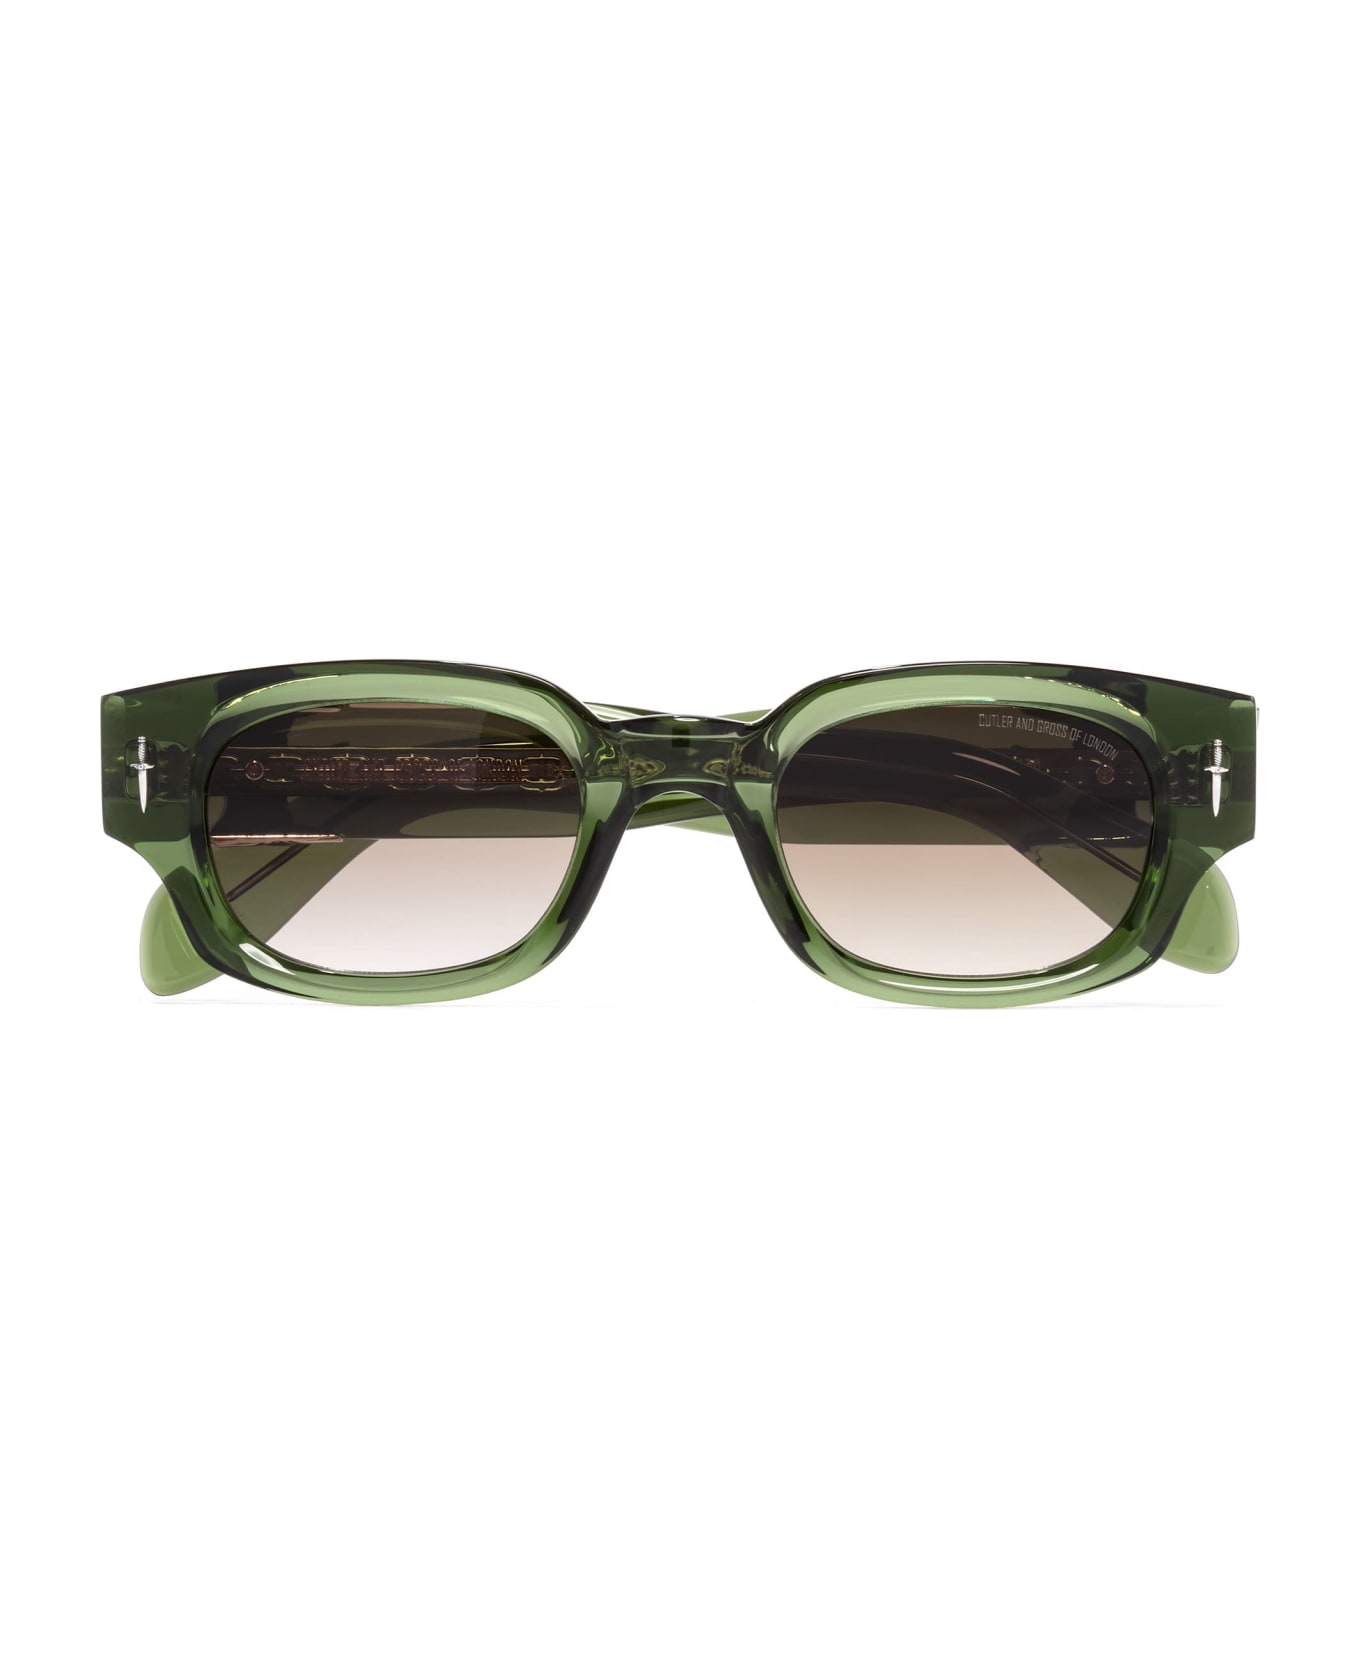 Cutler and Gross The Great Frog - Soaring Eagle / Leaf Green Sunglasses - green